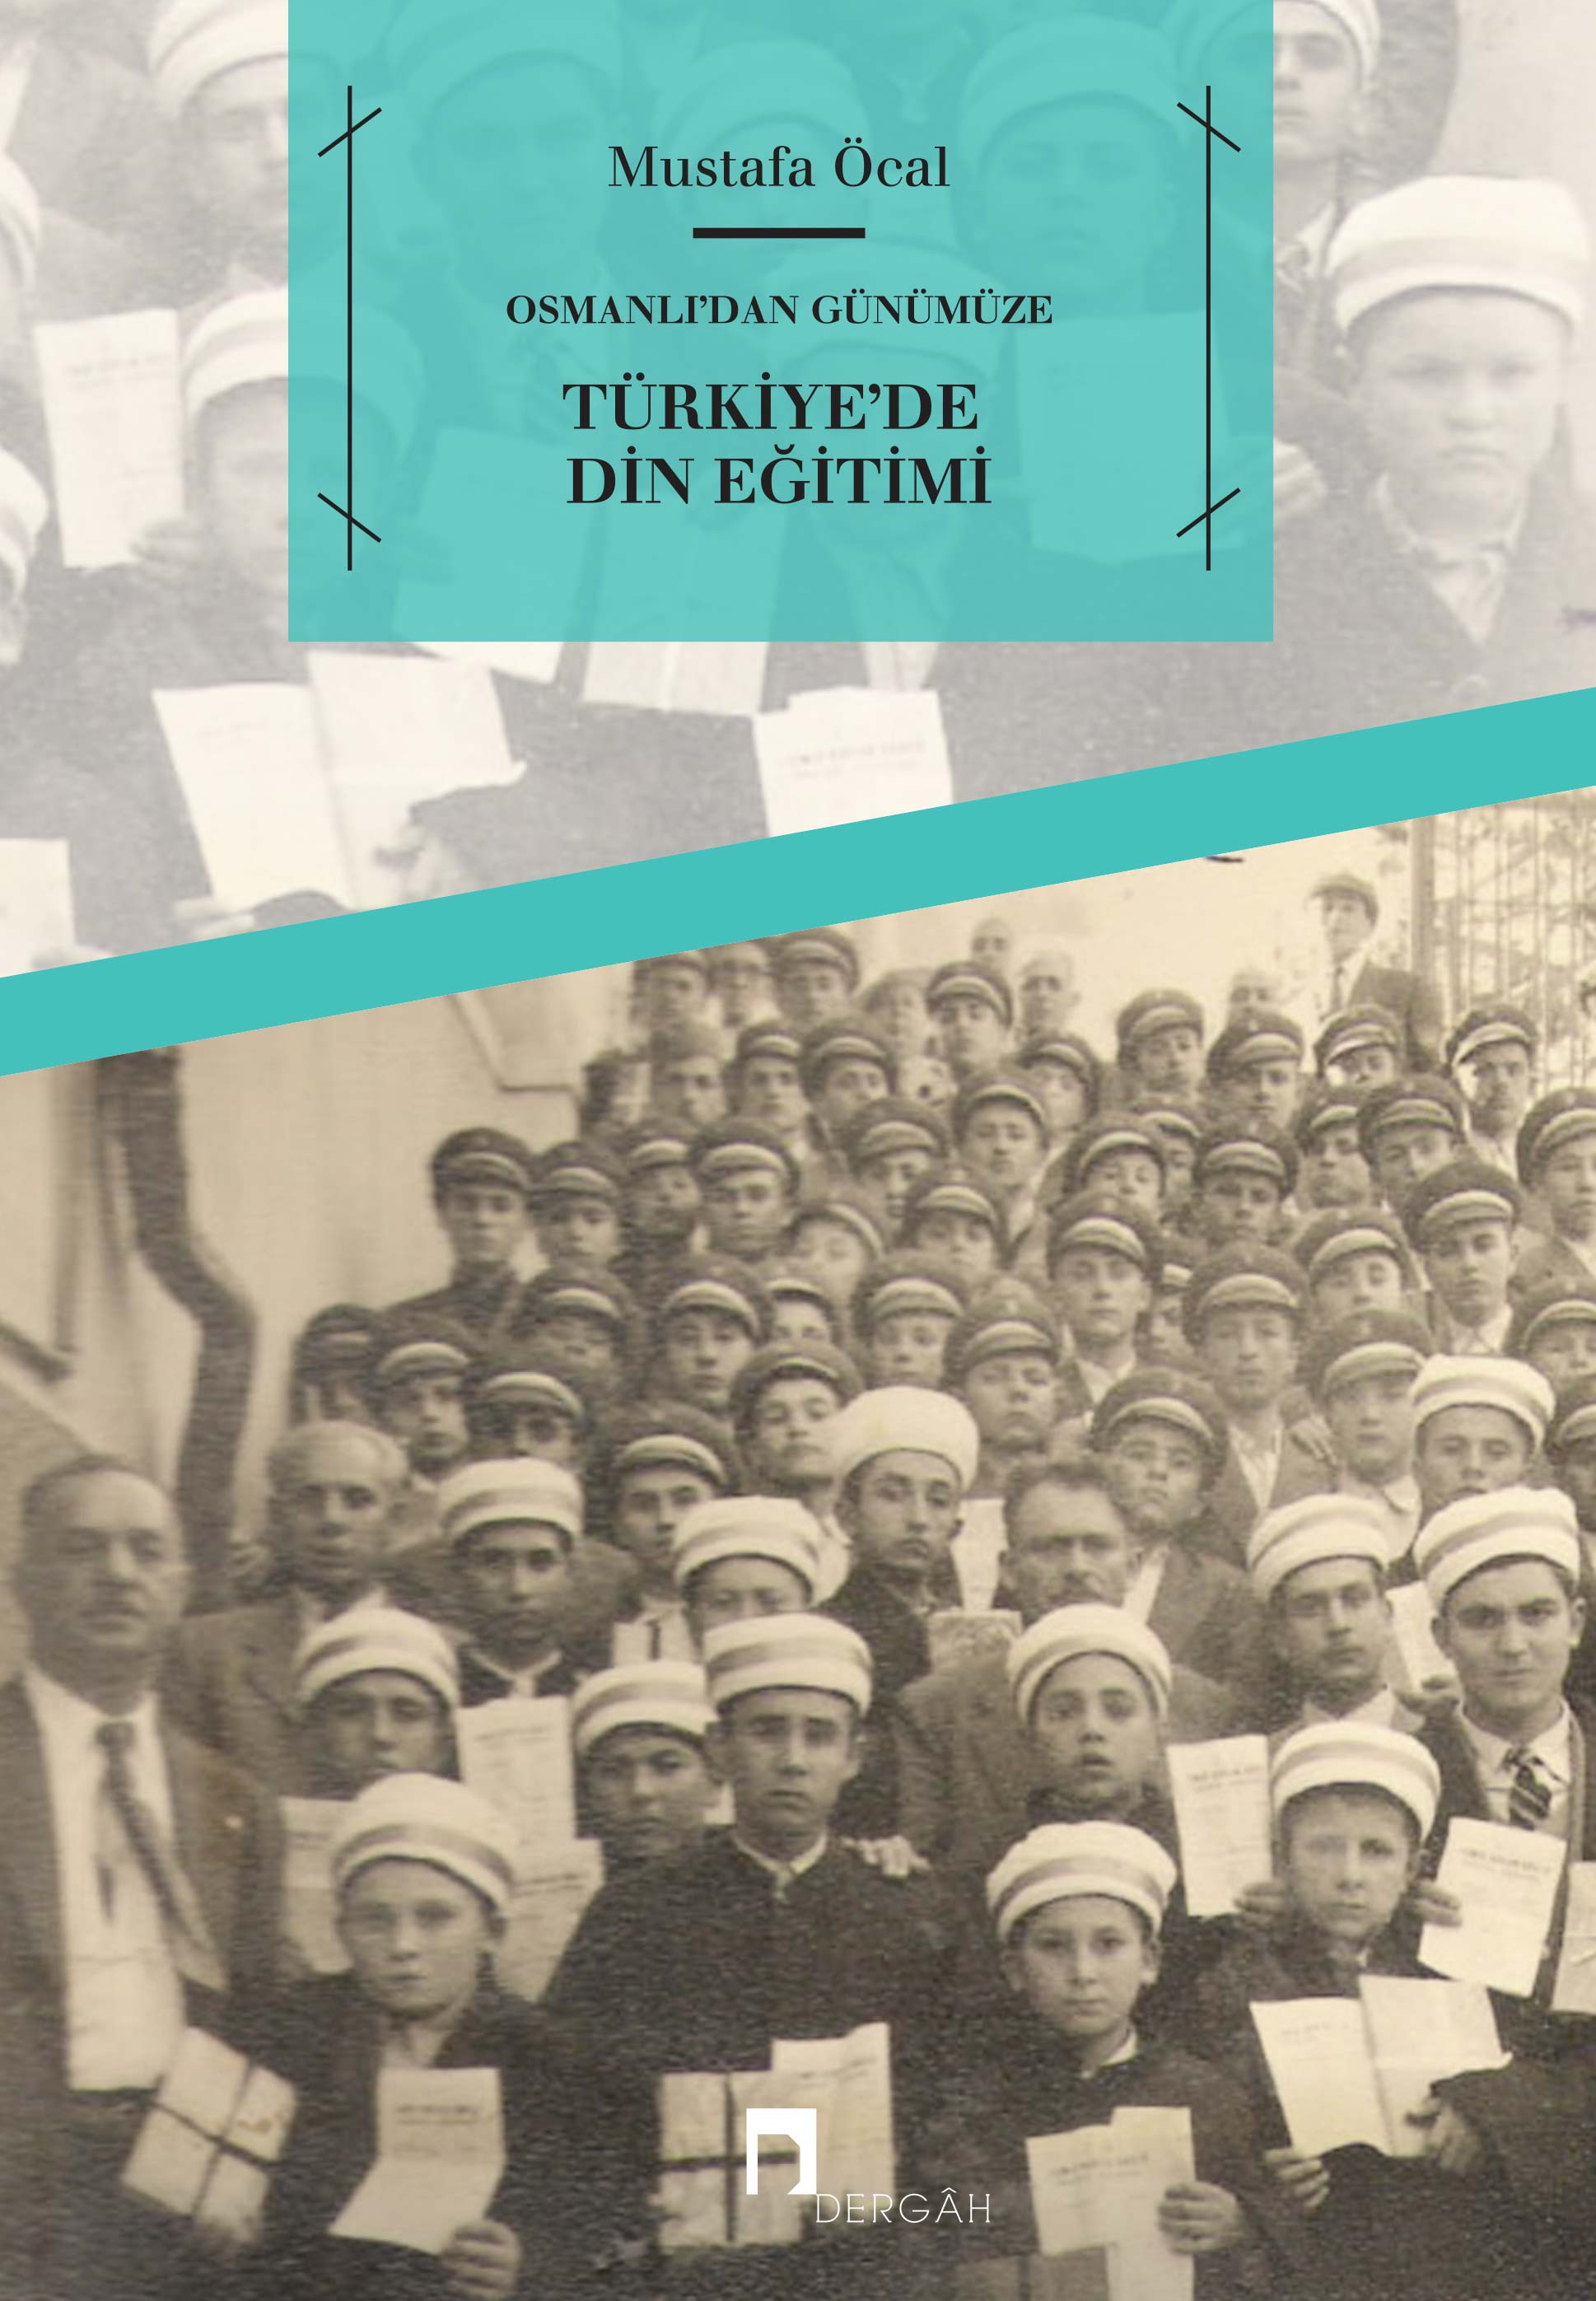 Religious Education in Turkey From Ottoman Time to the Present